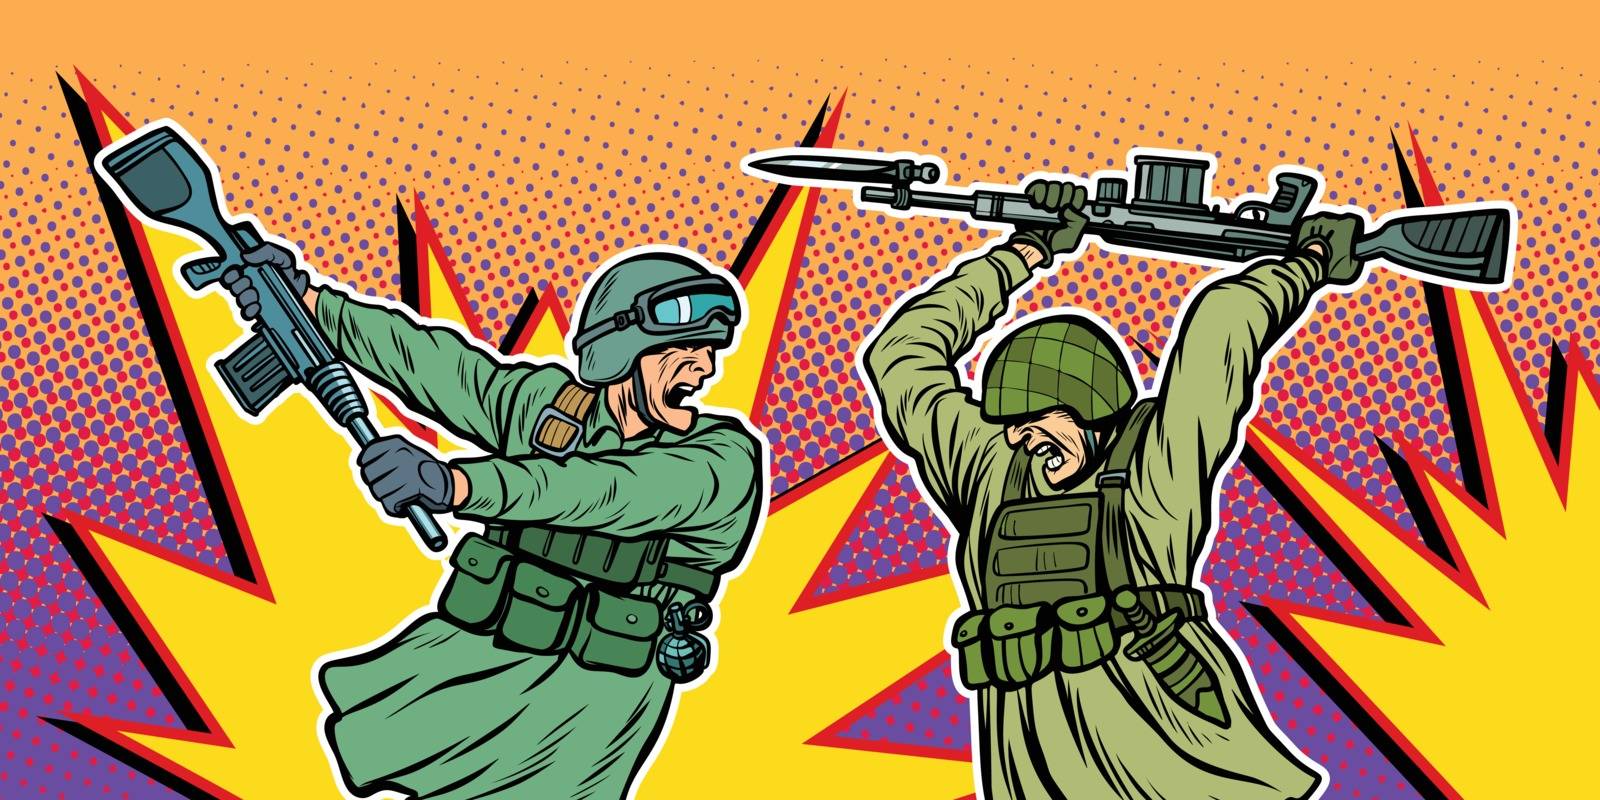 war and hatred. soldiers kill each other. Pop art retro vector illustration kitsch vintage